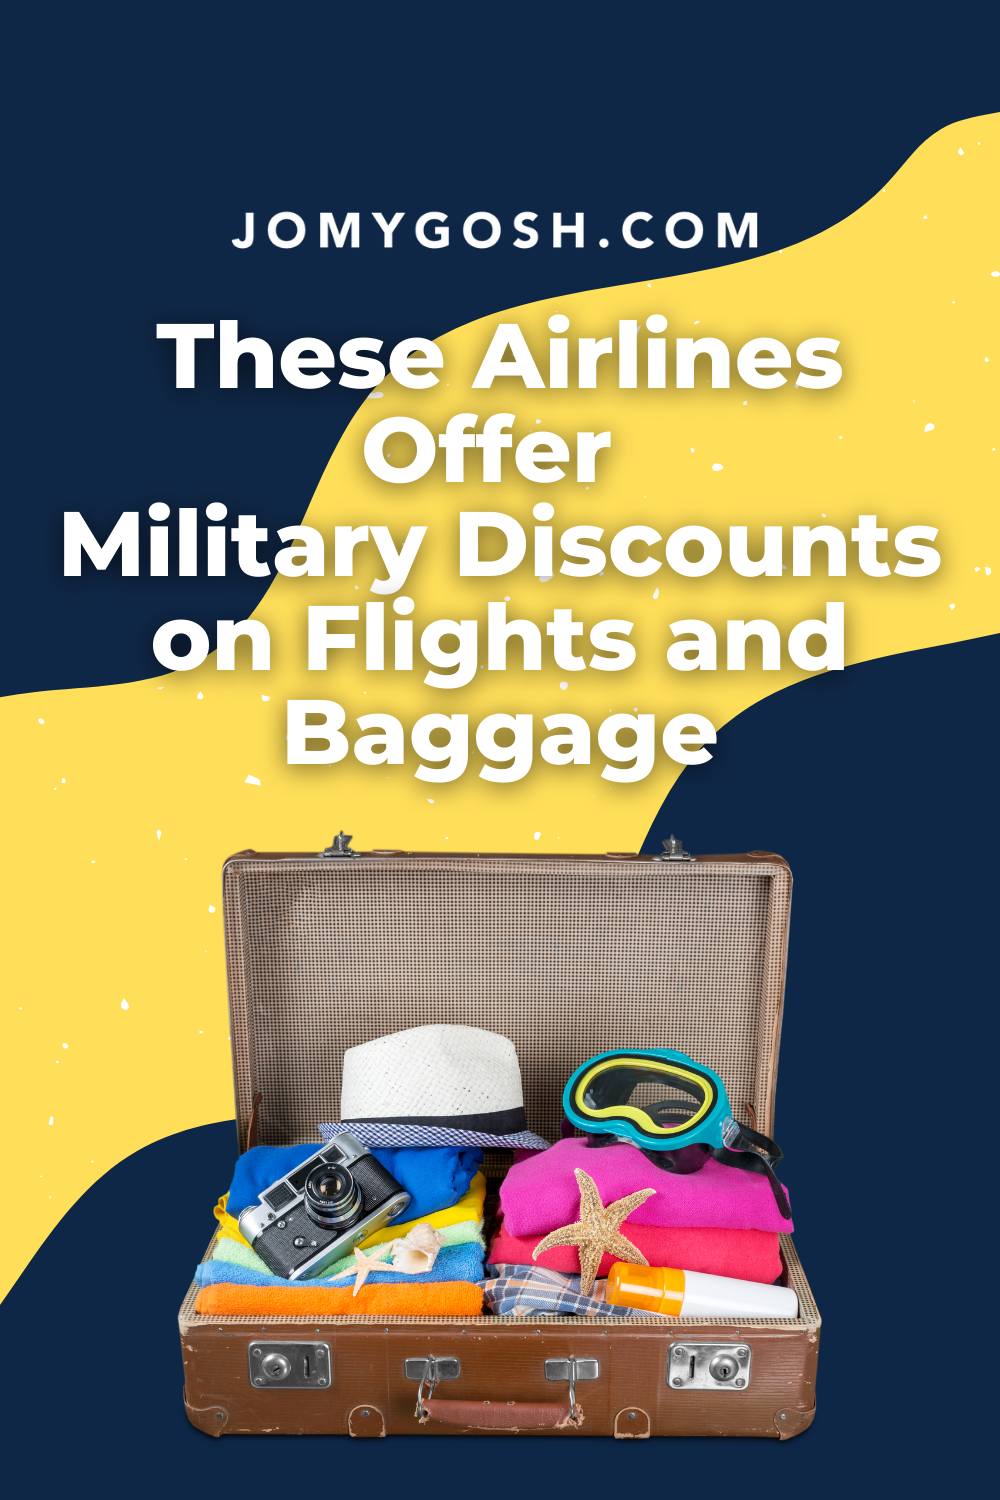 Save on flights and baggage the next time you travel with these military discounts and perks from national airlines.